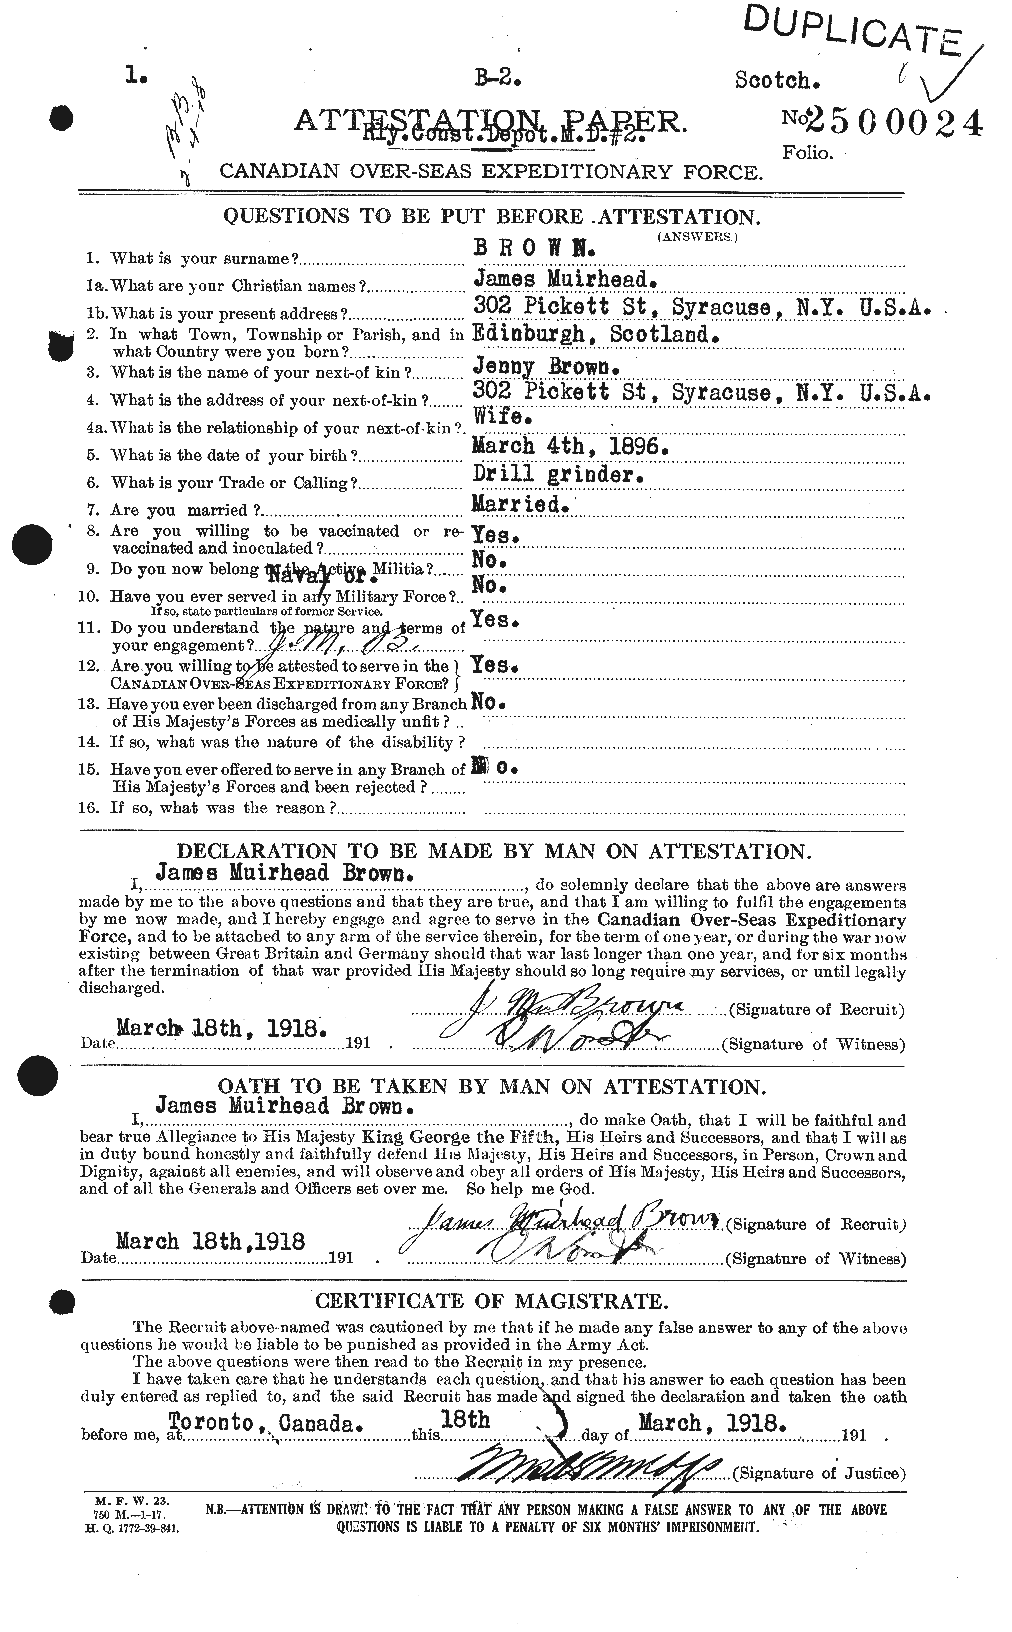 Personnel Records of the First World War - CEF 269559a